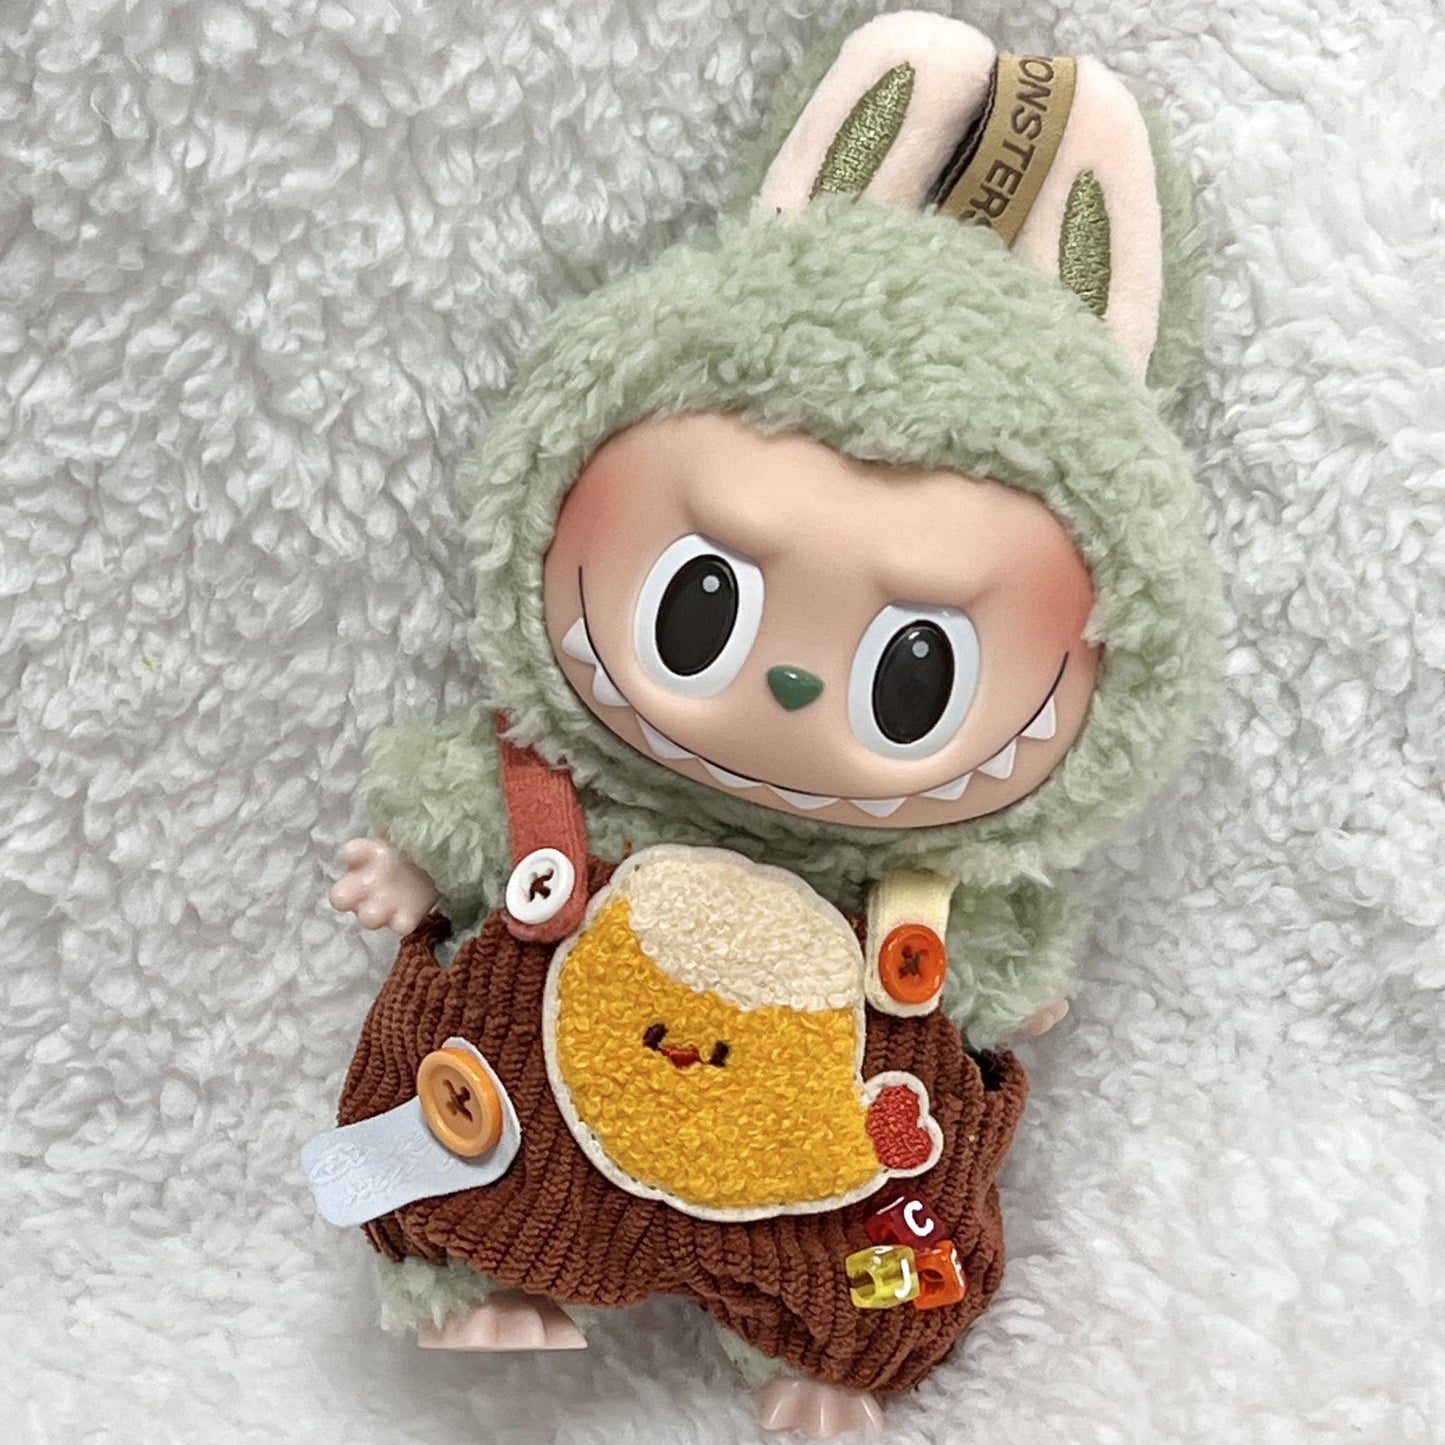 15 cm Cotton Doll Clothes Hoodie 20 cm Doll Overalls - TOY-ACC-79305 - Uchuuu Store - 42shops